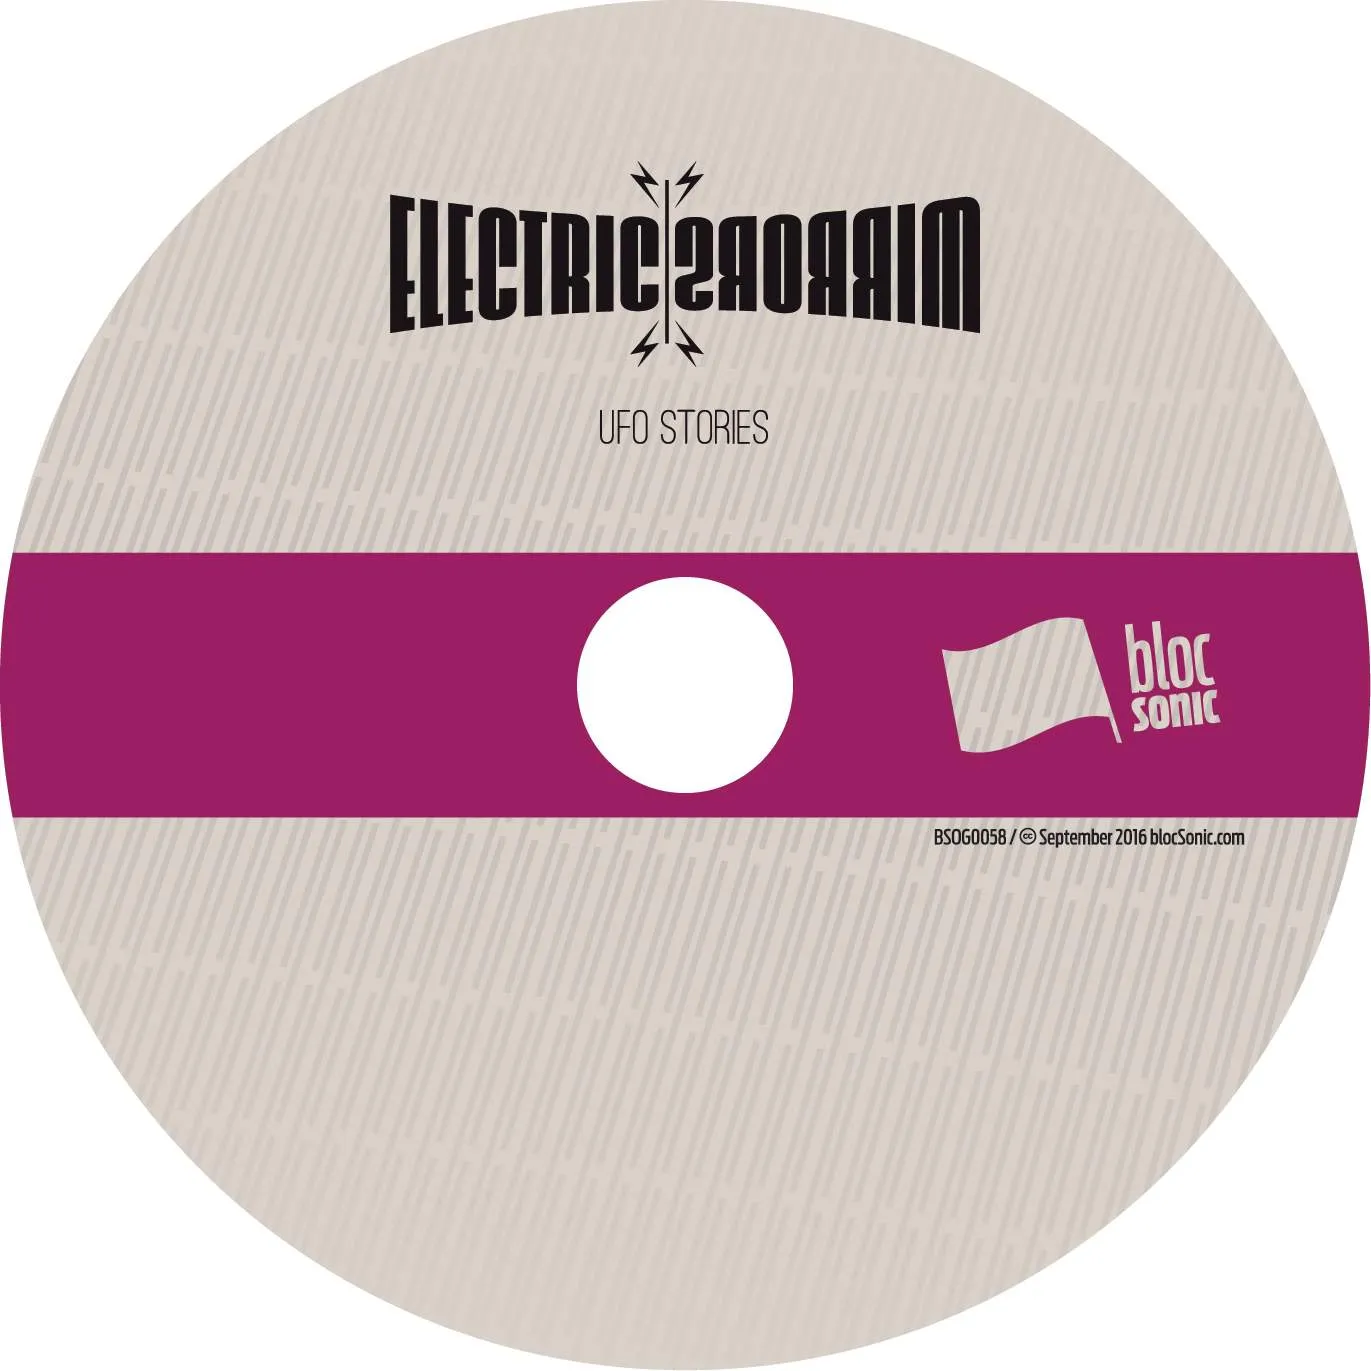 Album disc for “UFO Stories” by Electric Mirrors